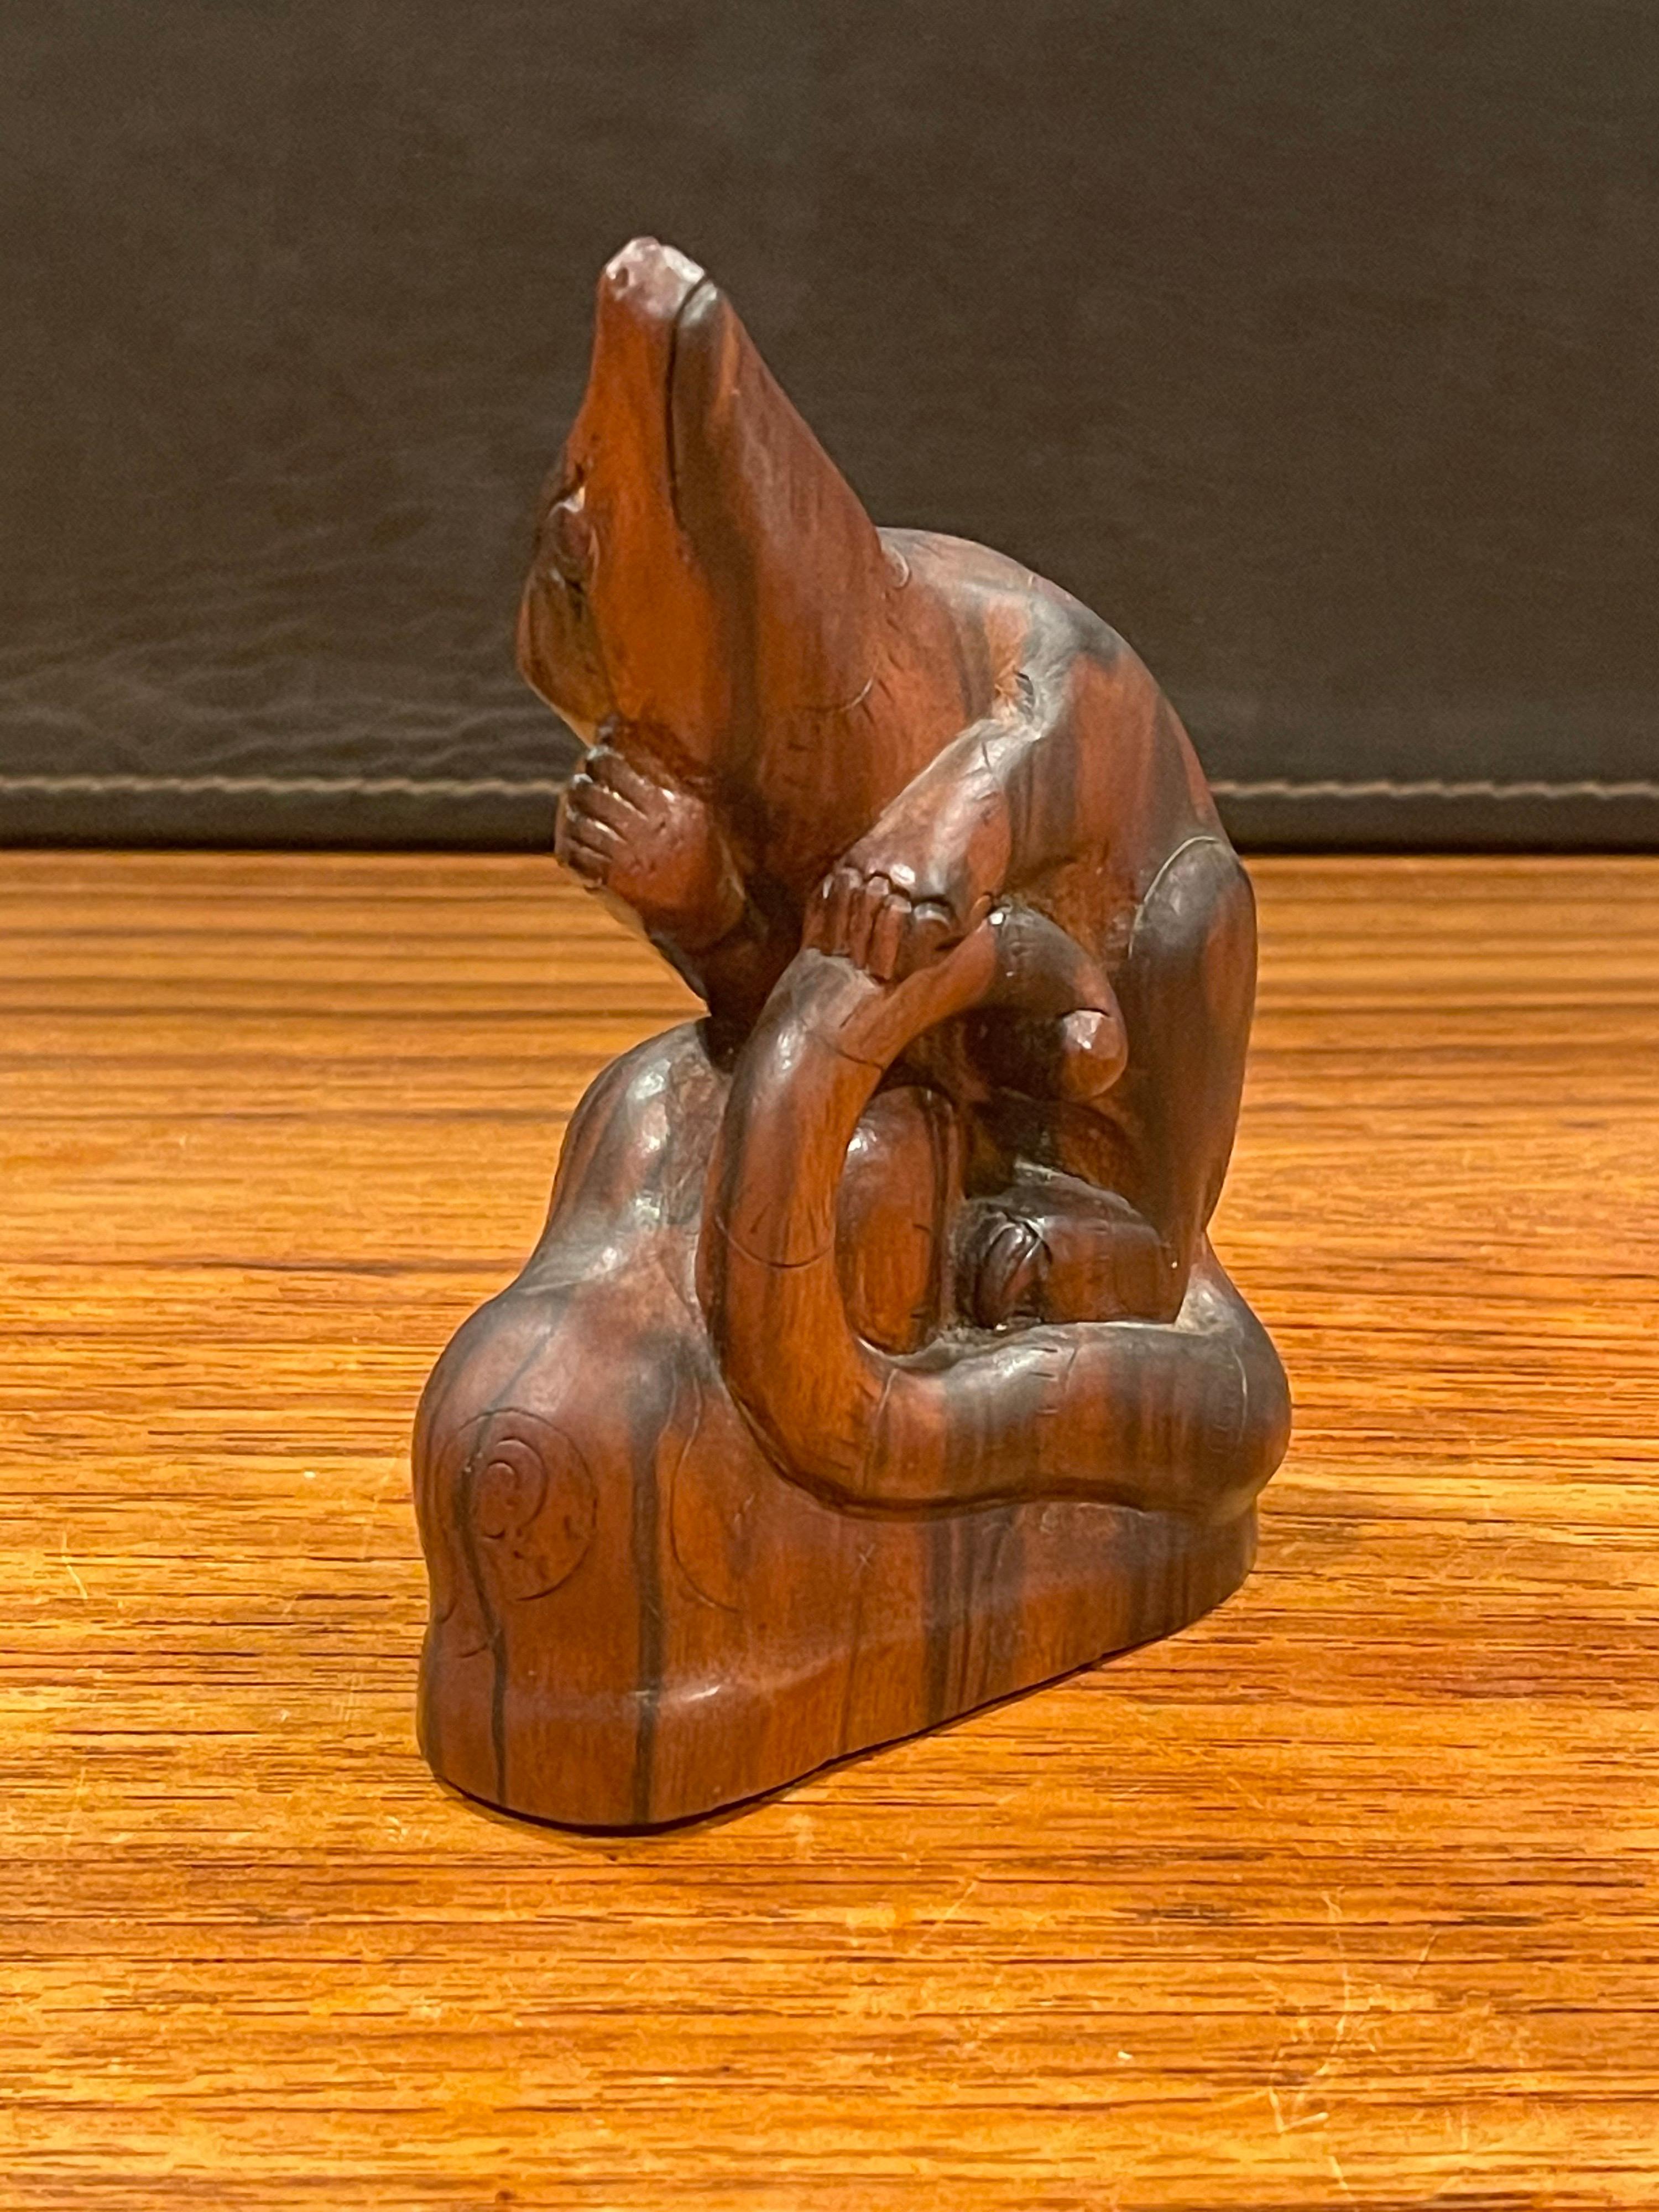 A very cool mid-century rat / rodent carving / sculpture in rosewood, circa 1970s. The piece measures 2.5